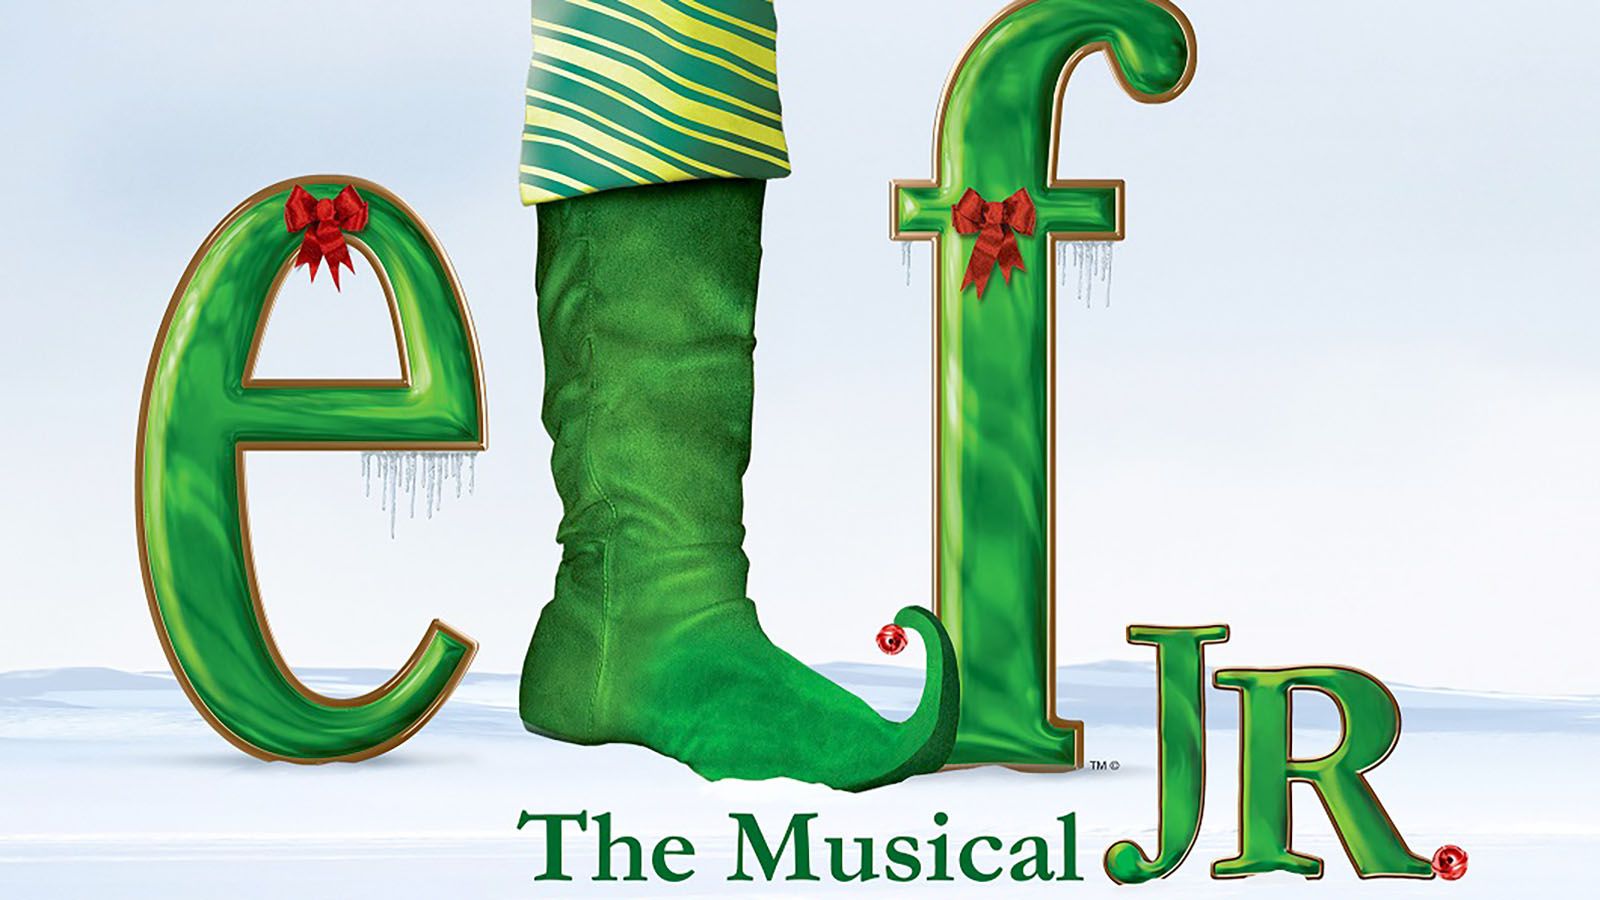 Fire & Light Productions will put on Elf Jr. the Musical at Arts United Center, Dec. 14-16.